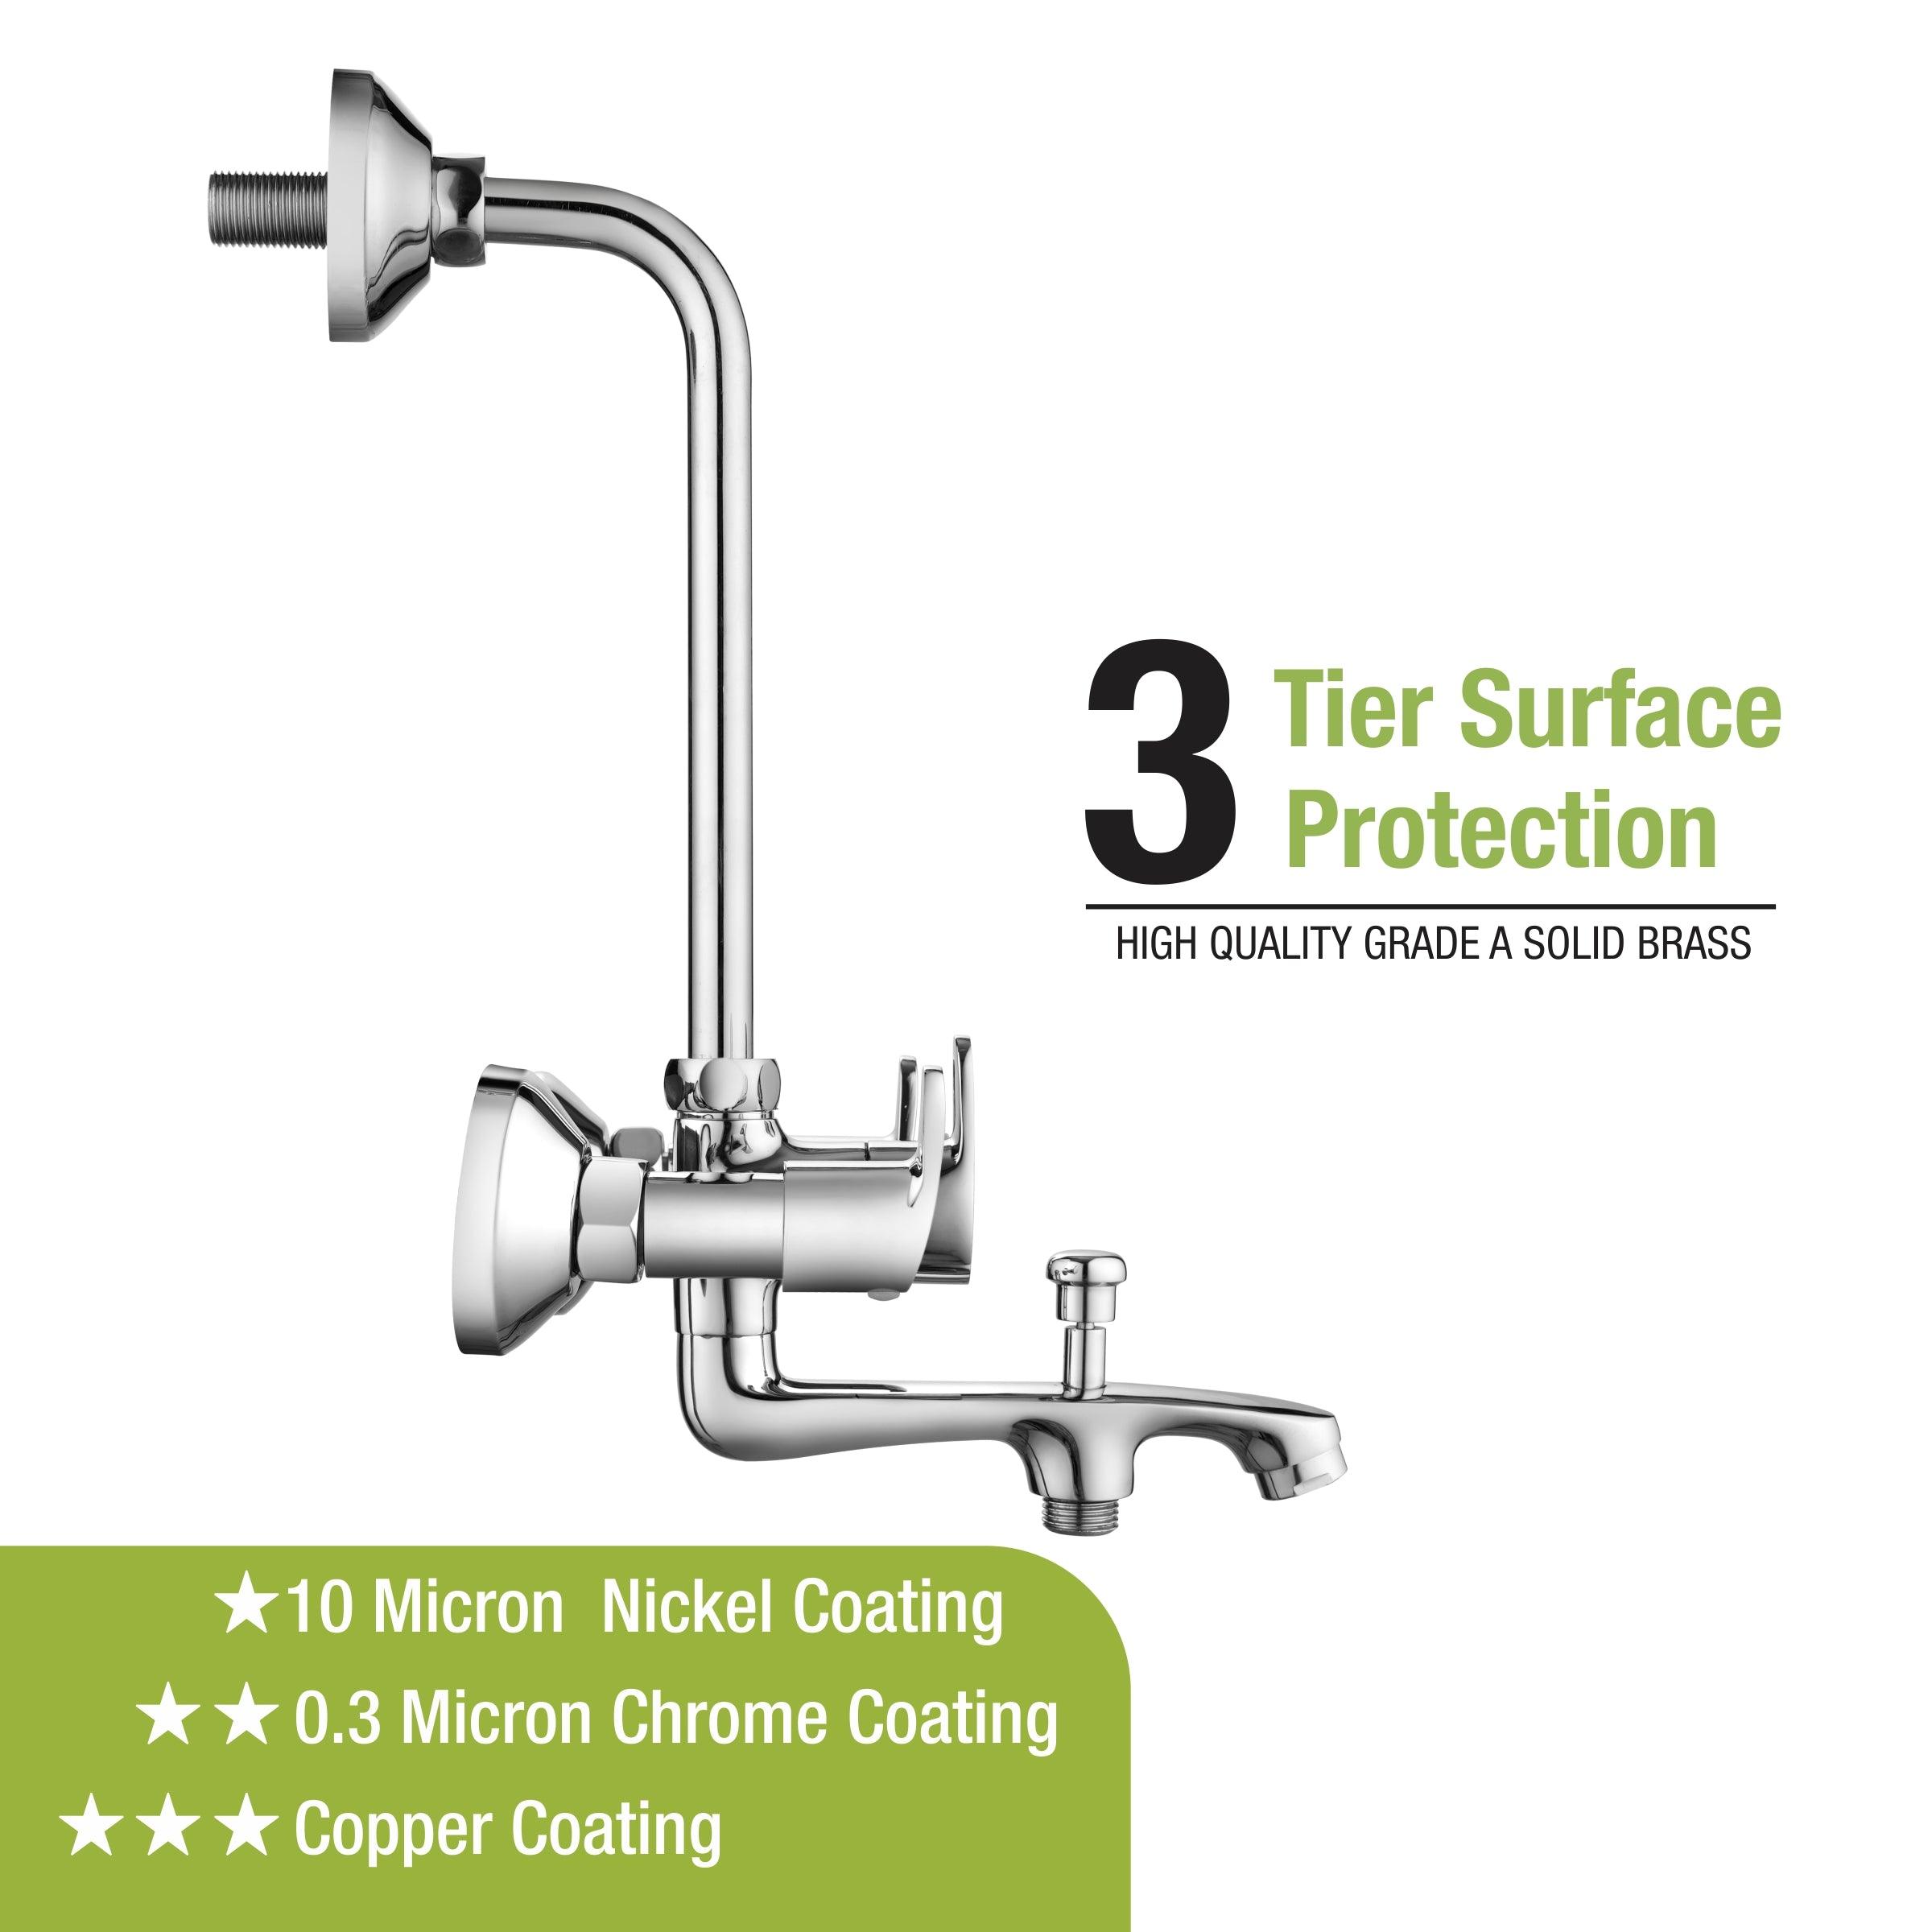 Apple Wall Mixer 3 in 1 Faucet with 3 tier surface protection